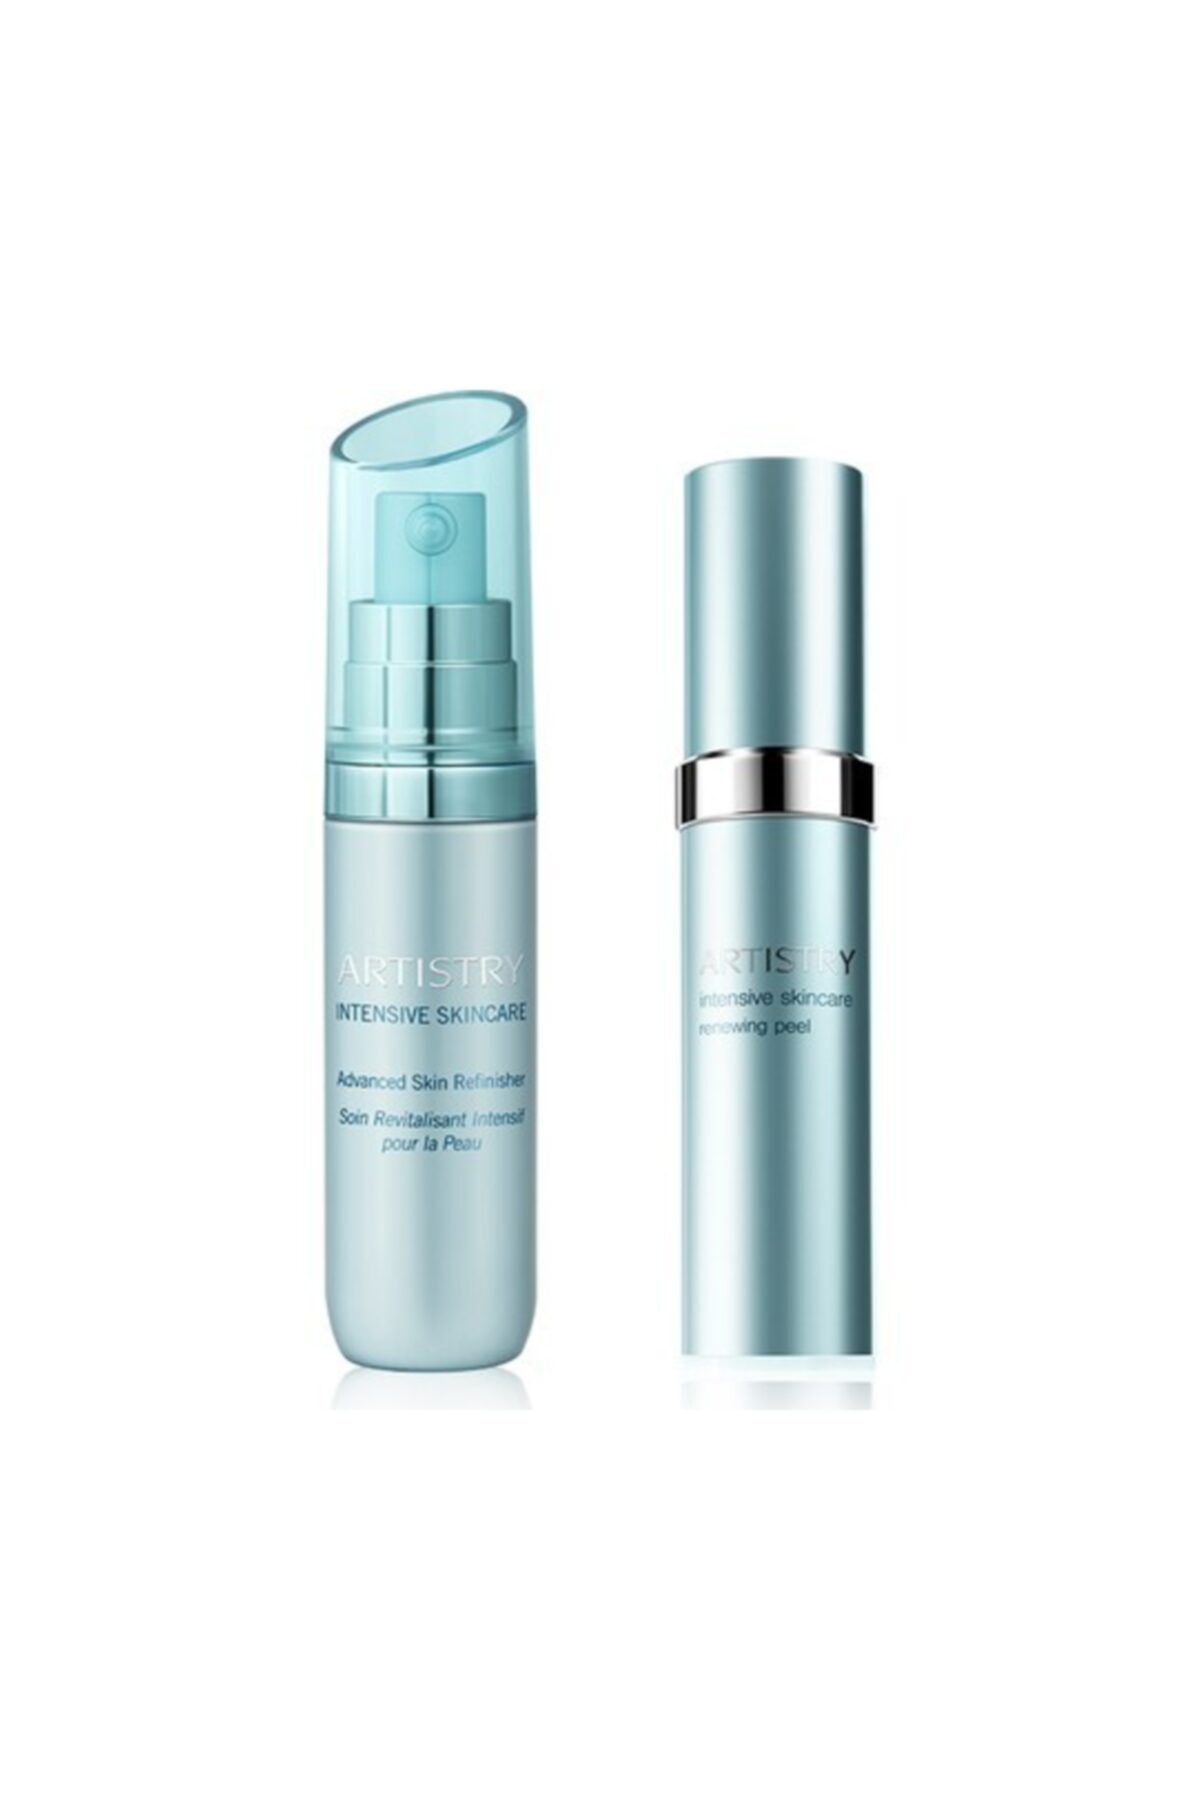 Amway Power Duo Artıstry Intensive Skincare